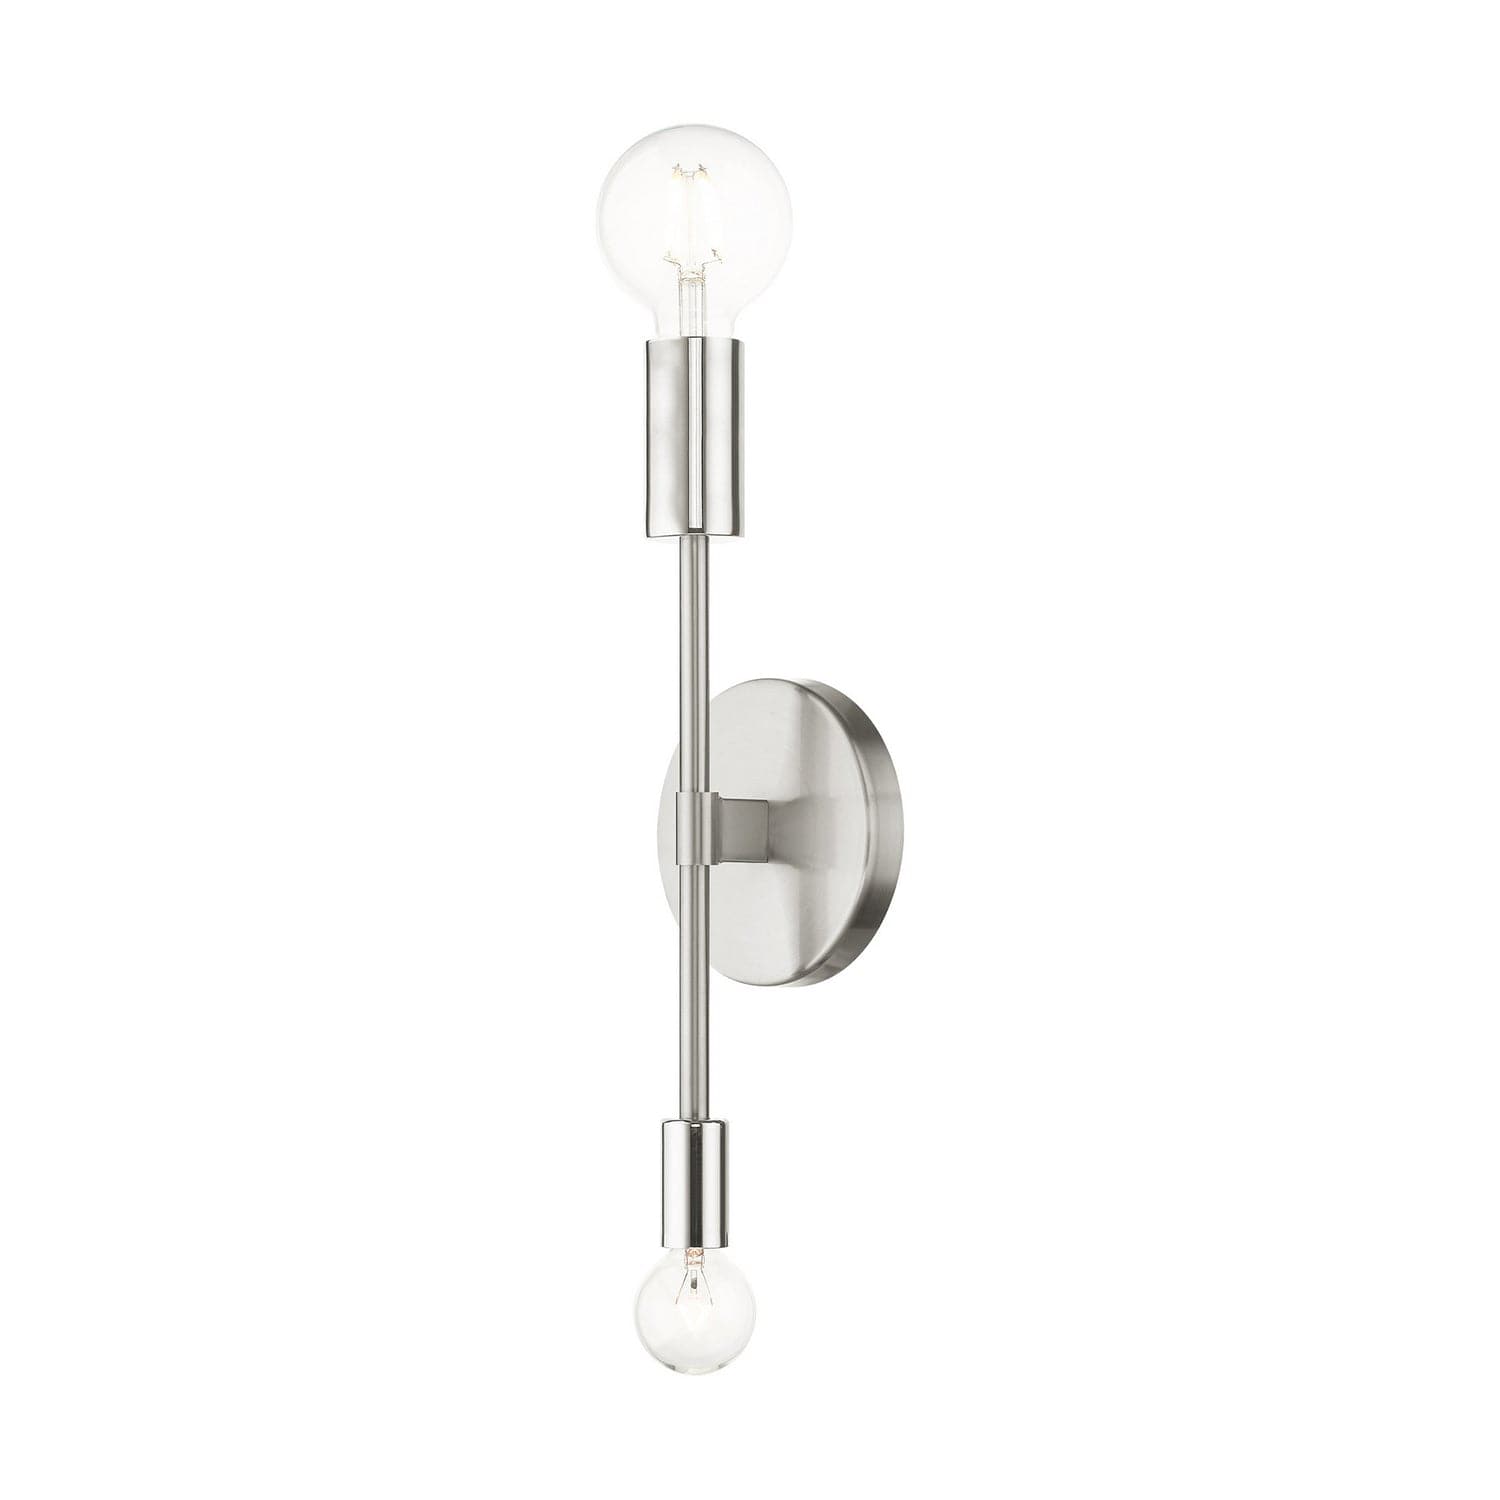 Livex Lighting - 46438-91 - Two Light Wall Sconce - Blairwood - Brushed Nickel w/ Polished Nickels